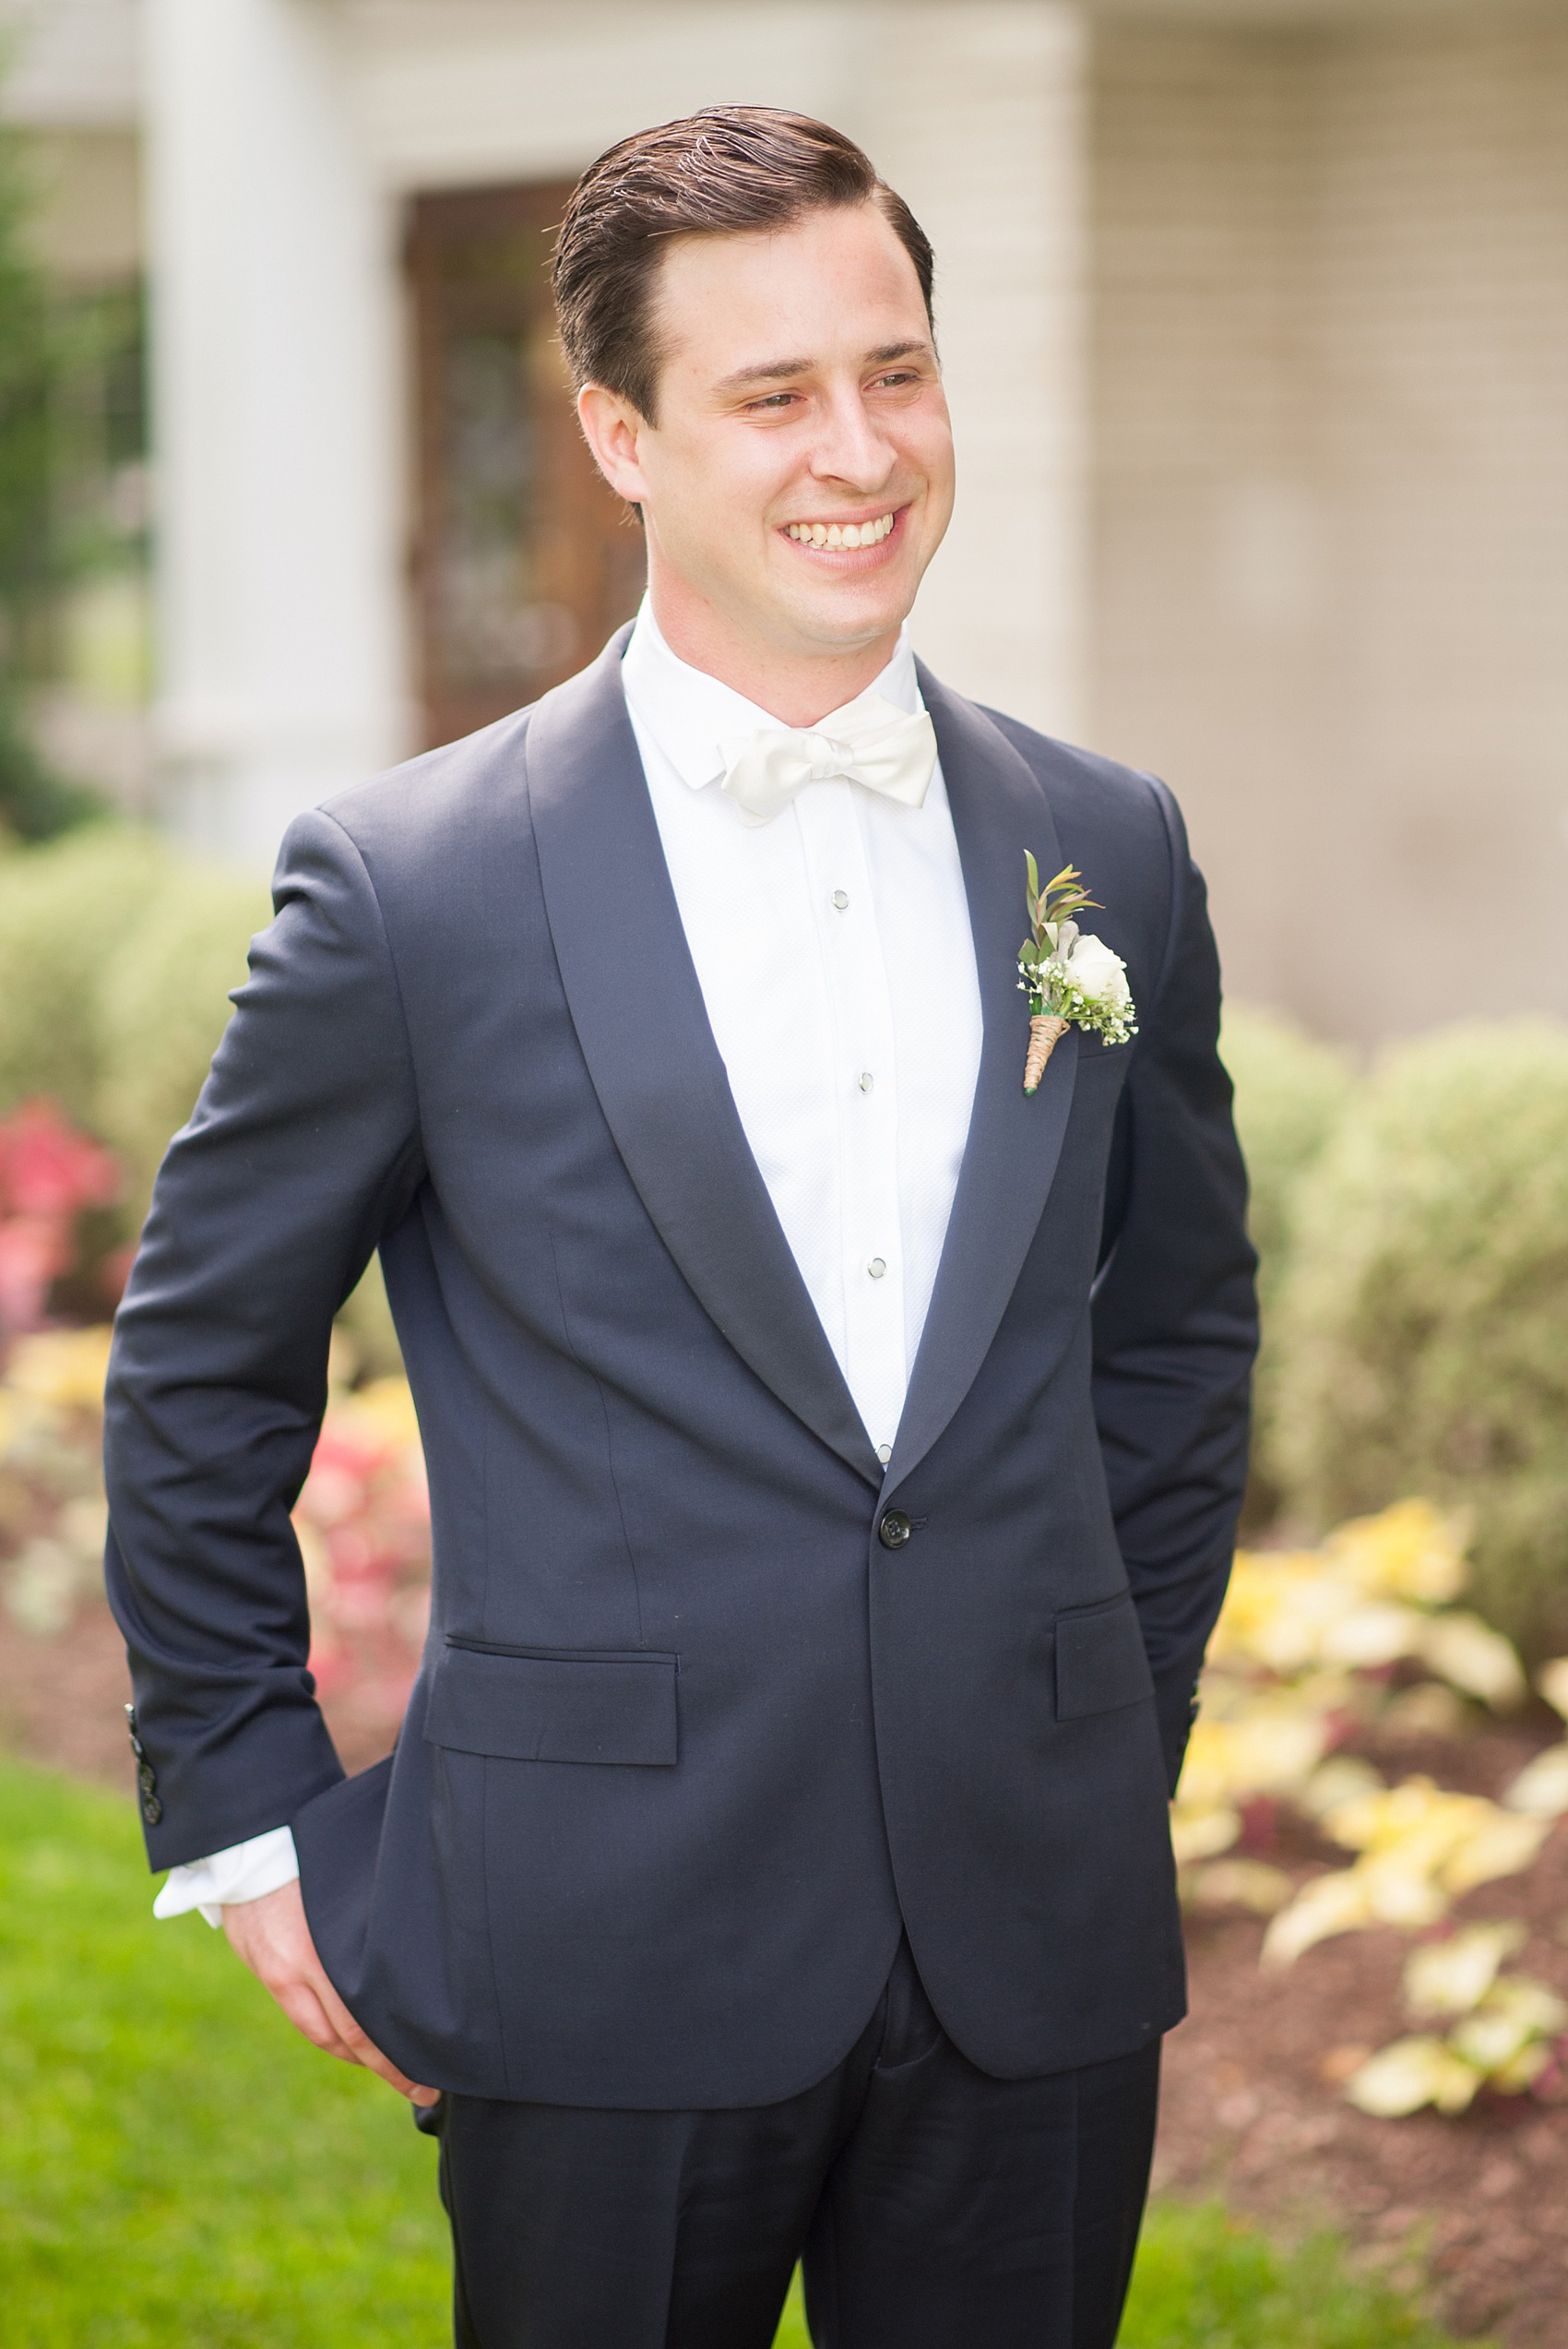 Mikkel Paige Photography photo of a wedding at the Madison Hotel in NJ. Image of the groom in his navy blue JCrew tuxedo and white bow tie.